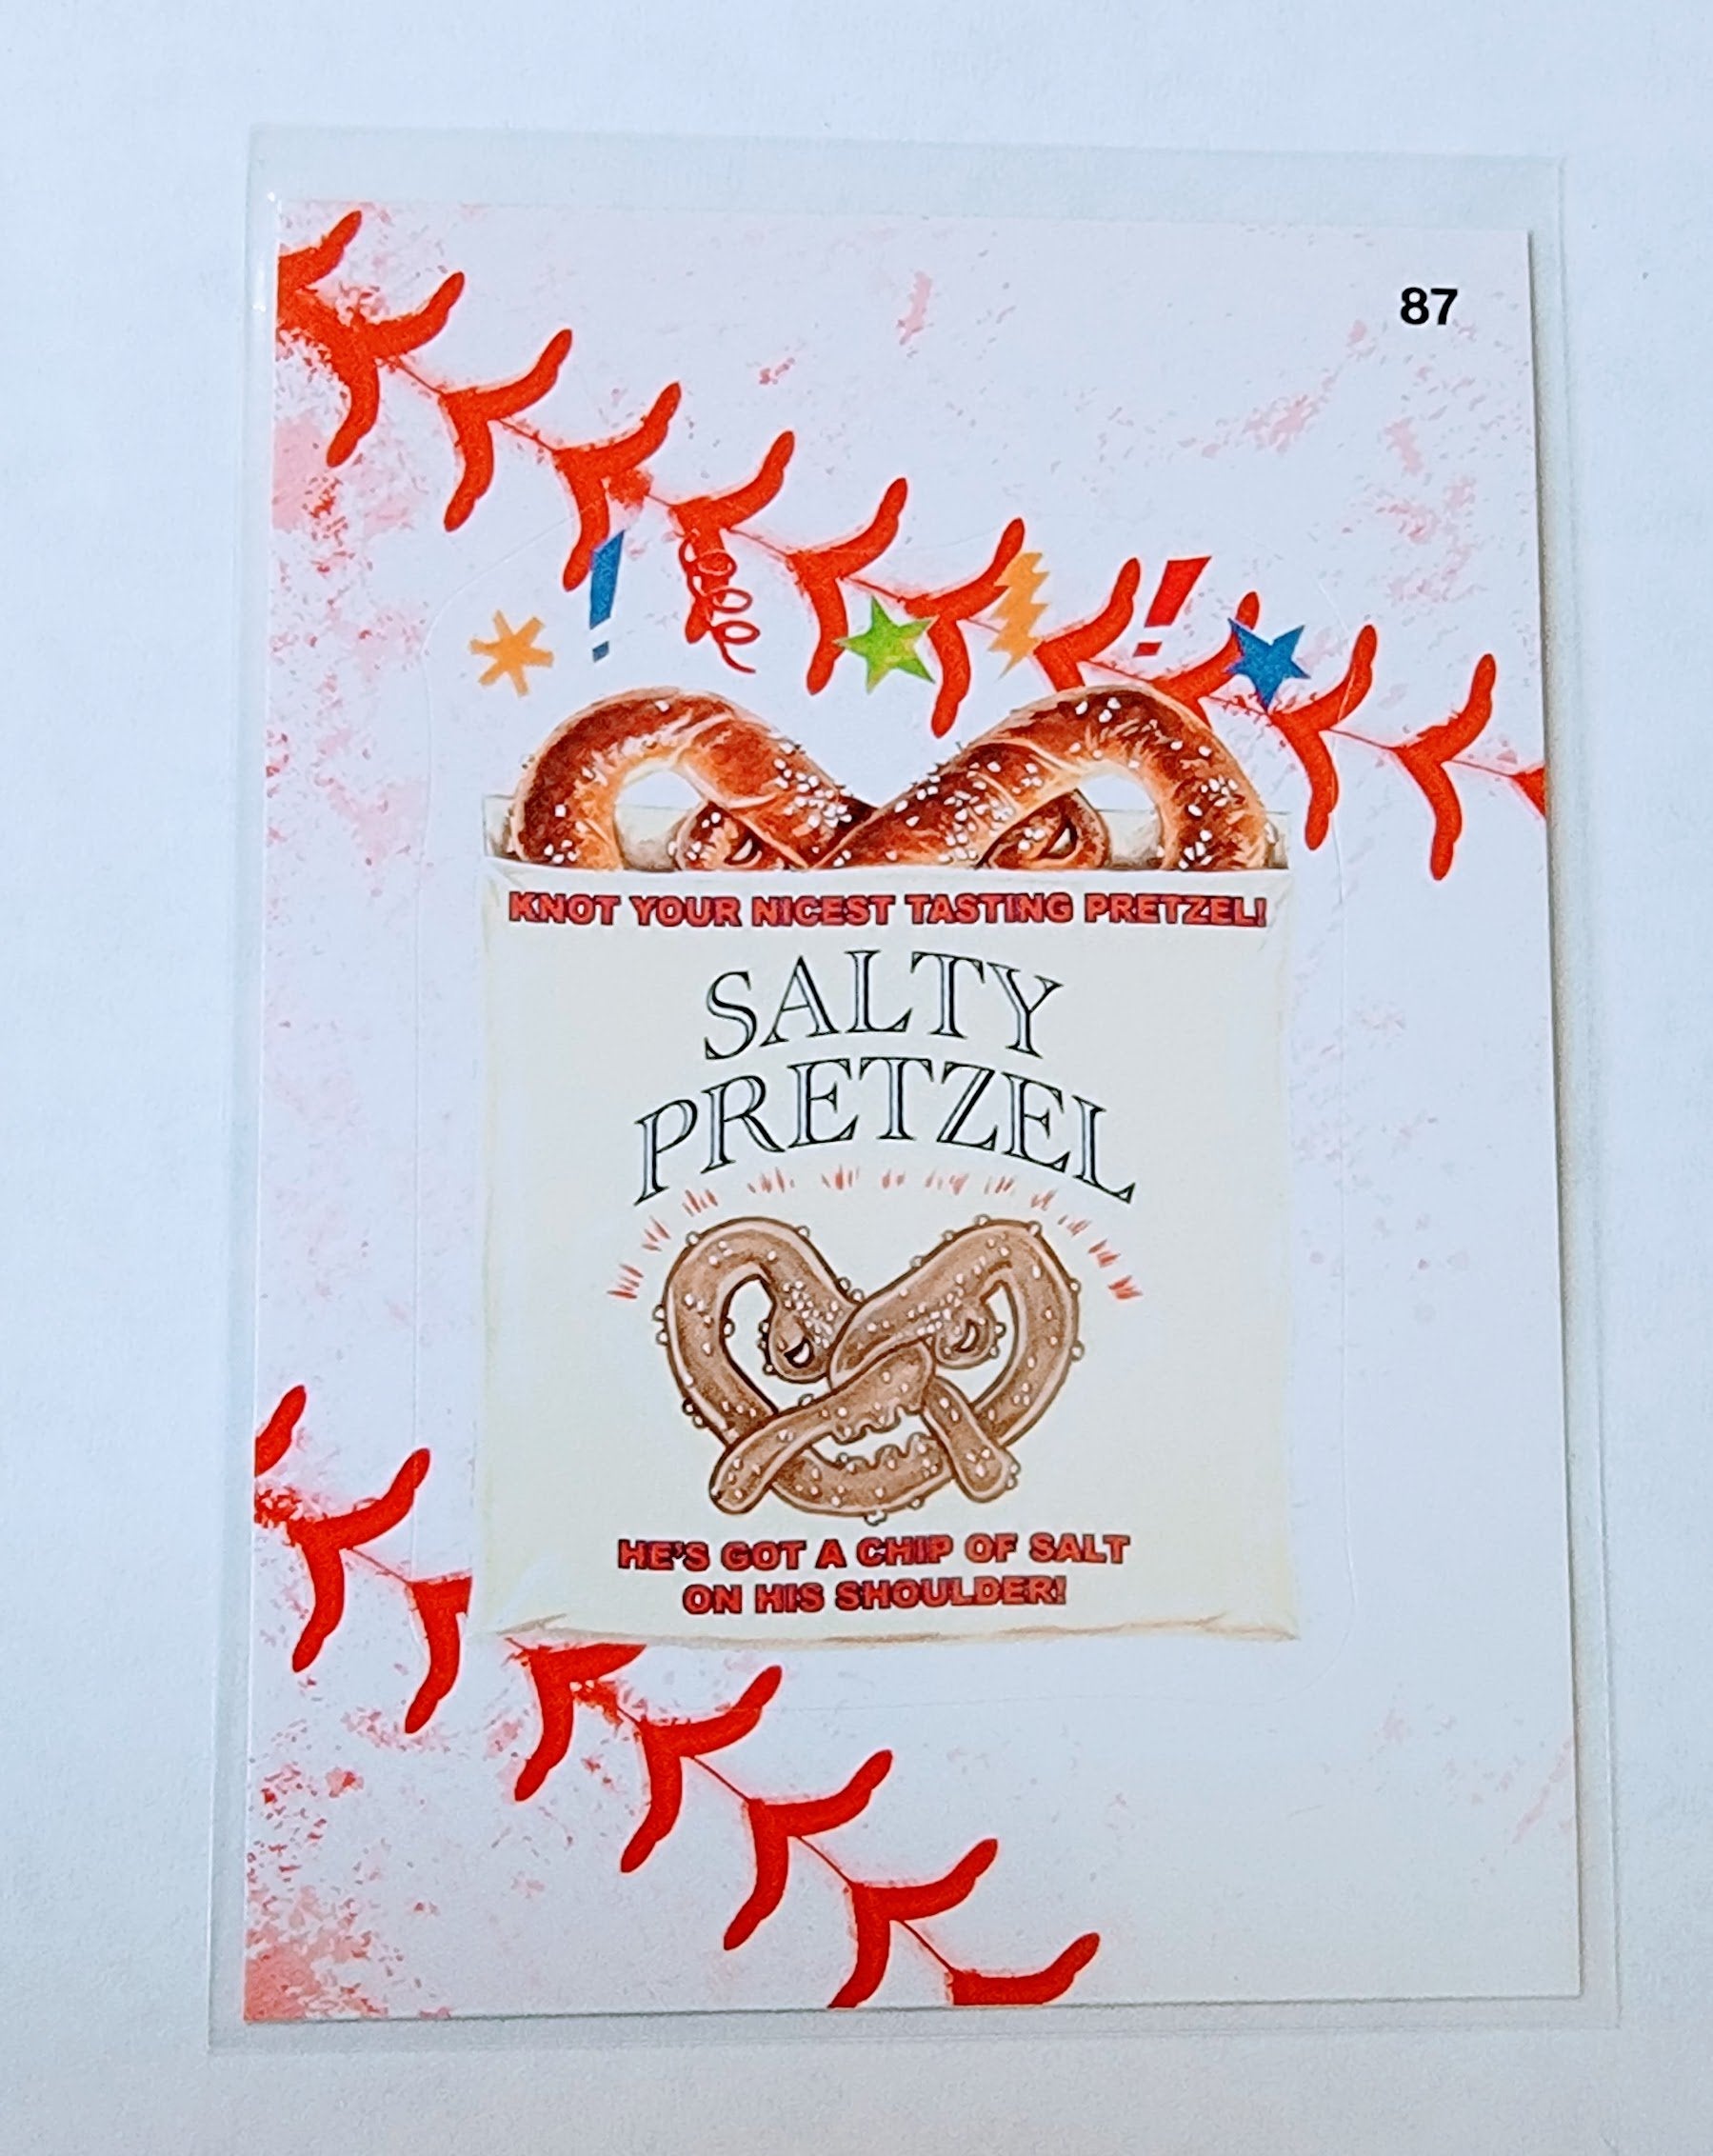 2016 Topps MLB Baseball Wacky Packages Salty Pretzel Lace Parallel Sticker Trading Card MCSC1 simple Xclusive Collectibles   